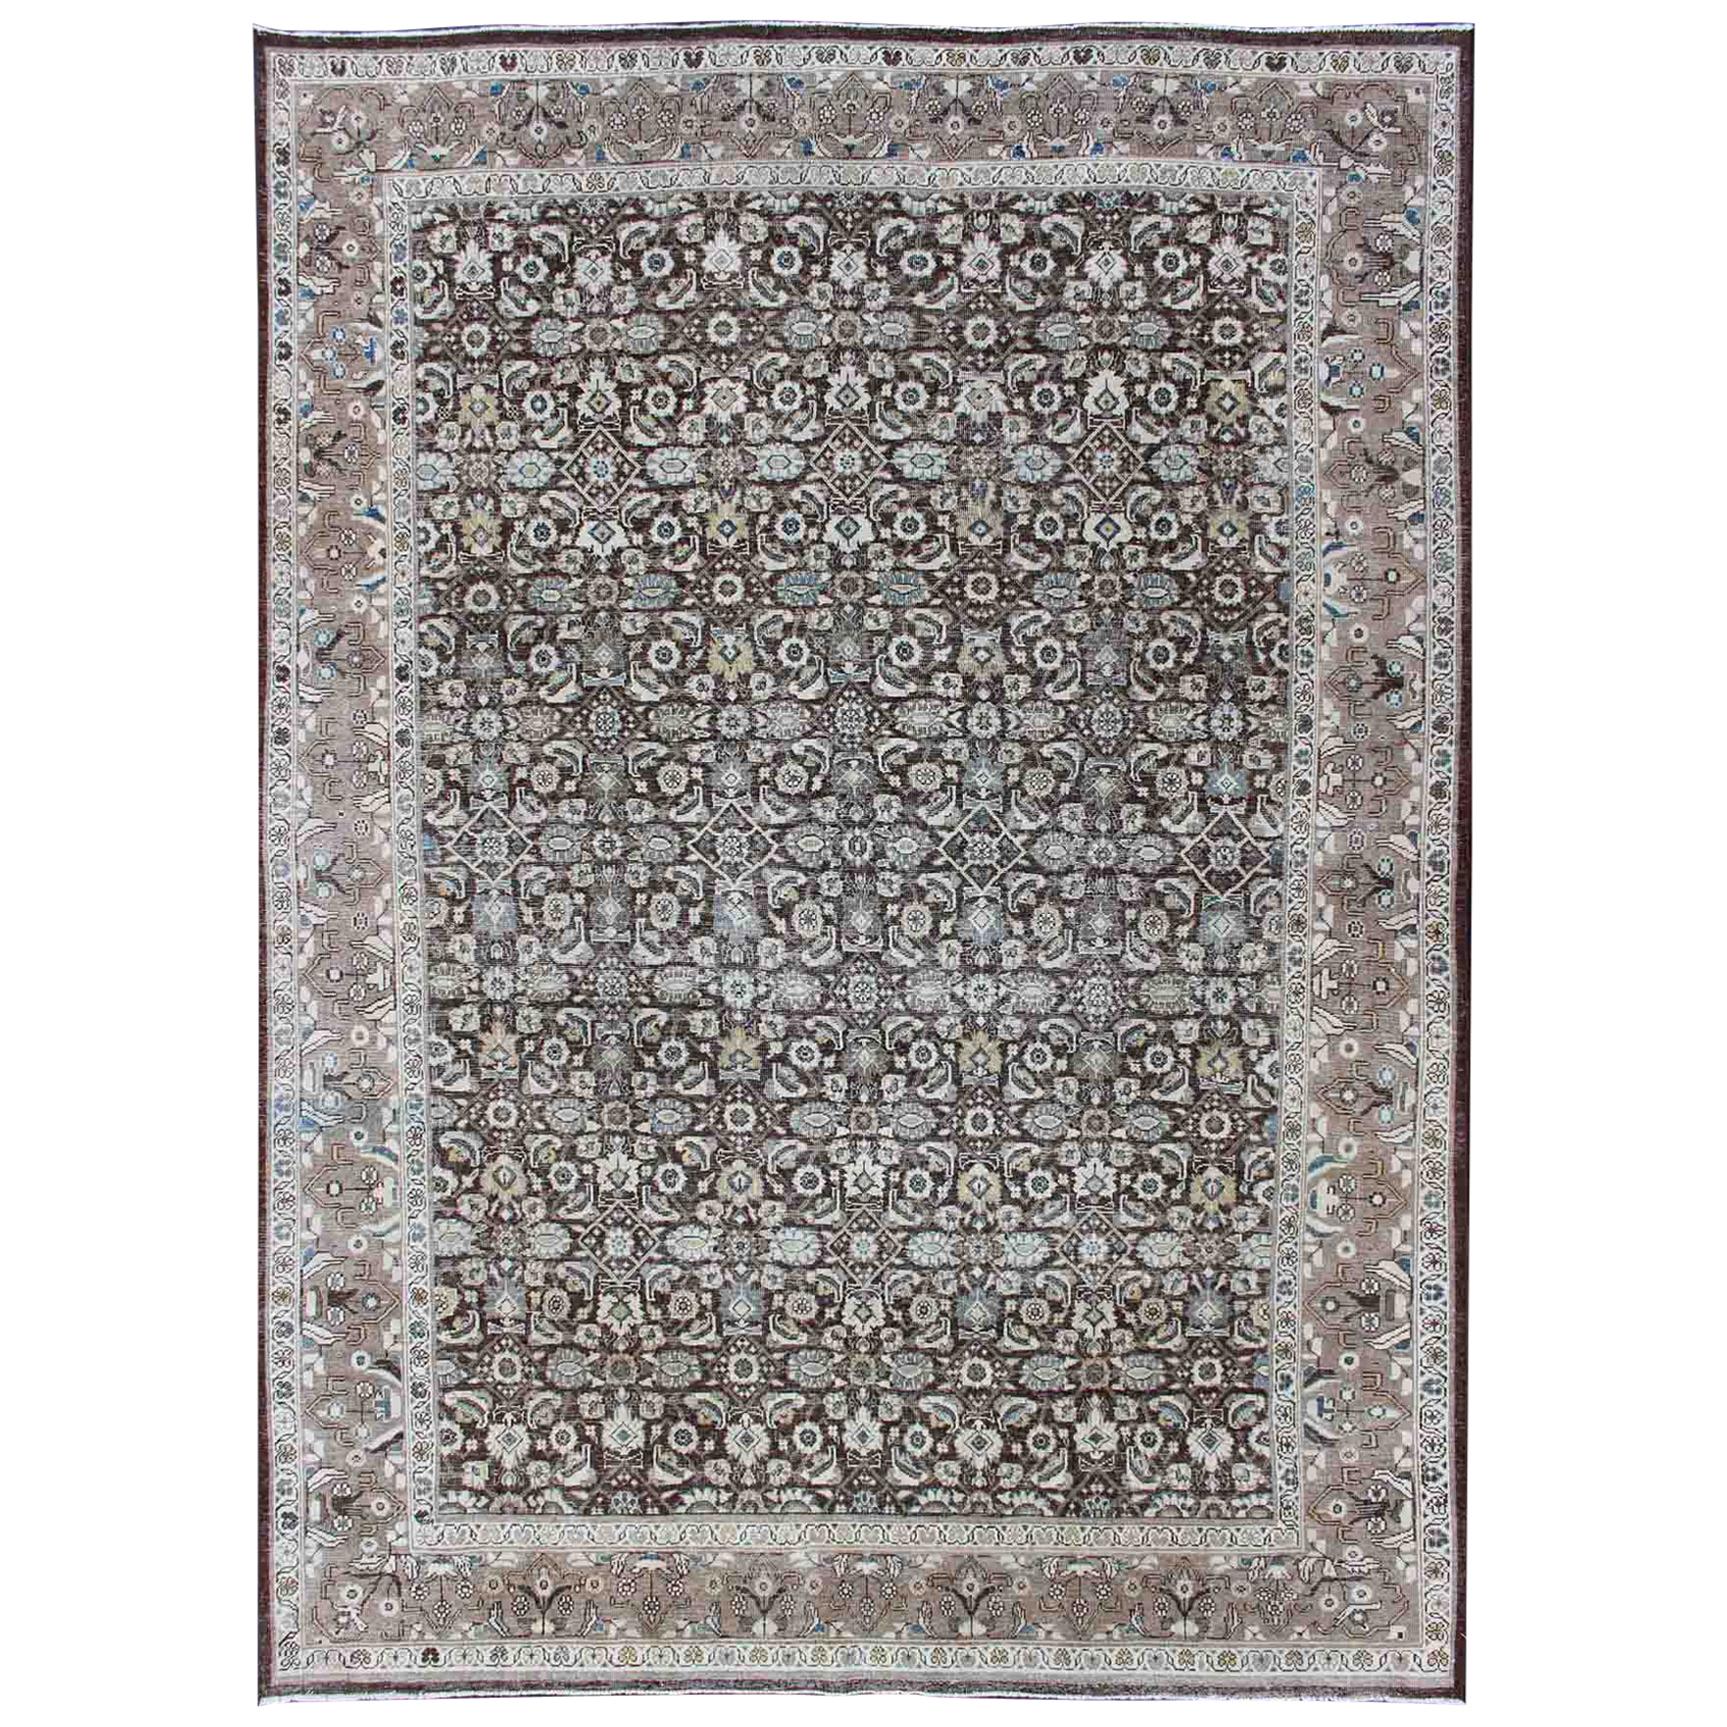 Chocolate Brown Background Antique Persian Tabriz Rug with All-Over Design